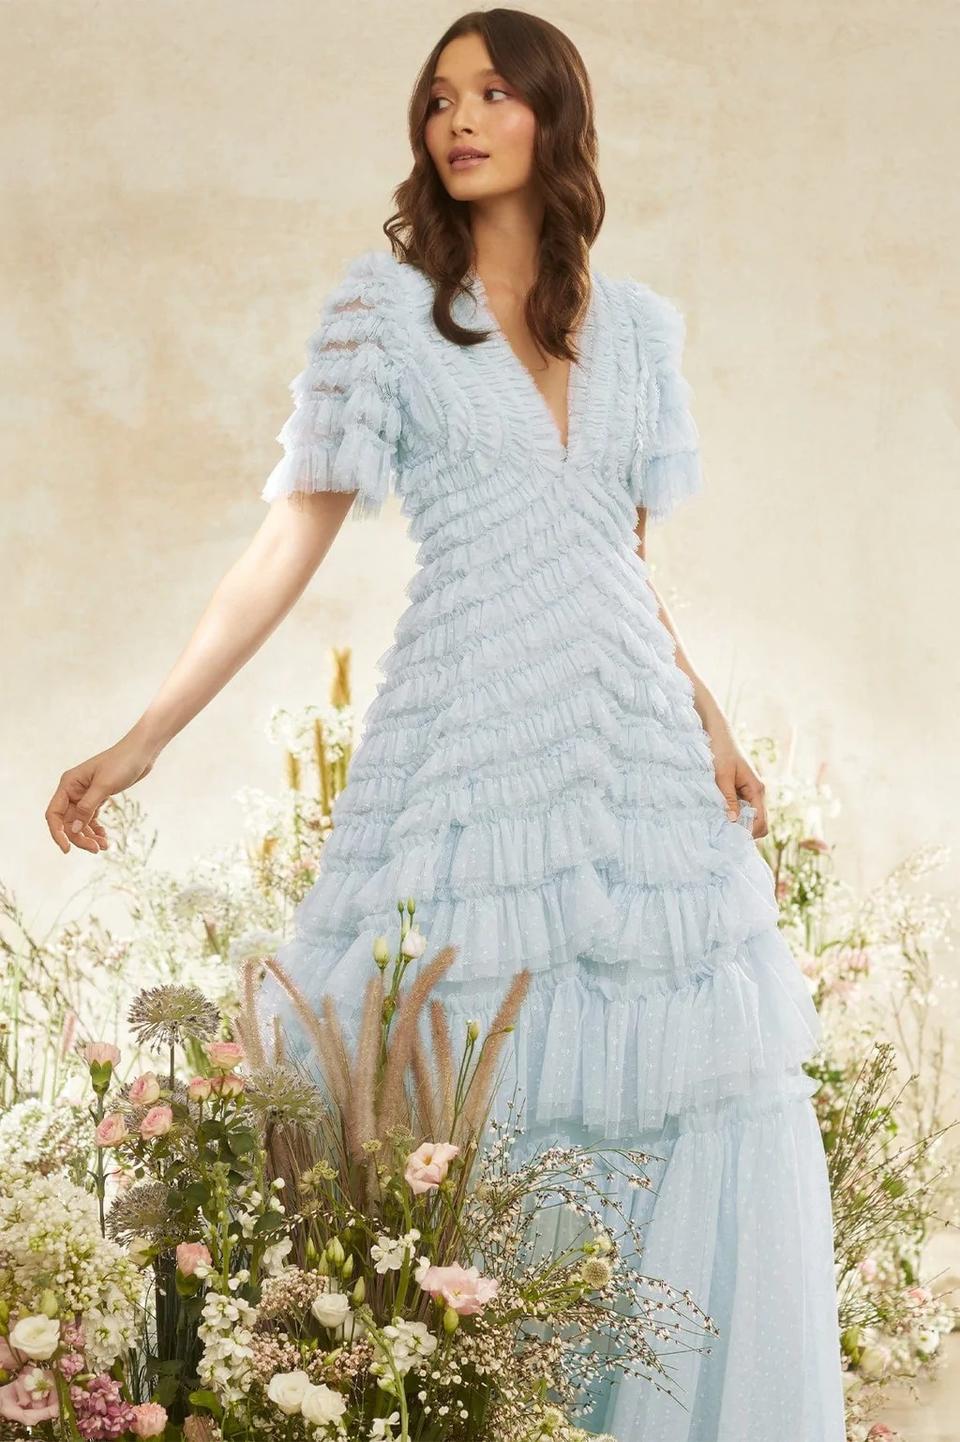 Blue Wedding Dresses: The Best Styles & What it Means - hitched.co.uk